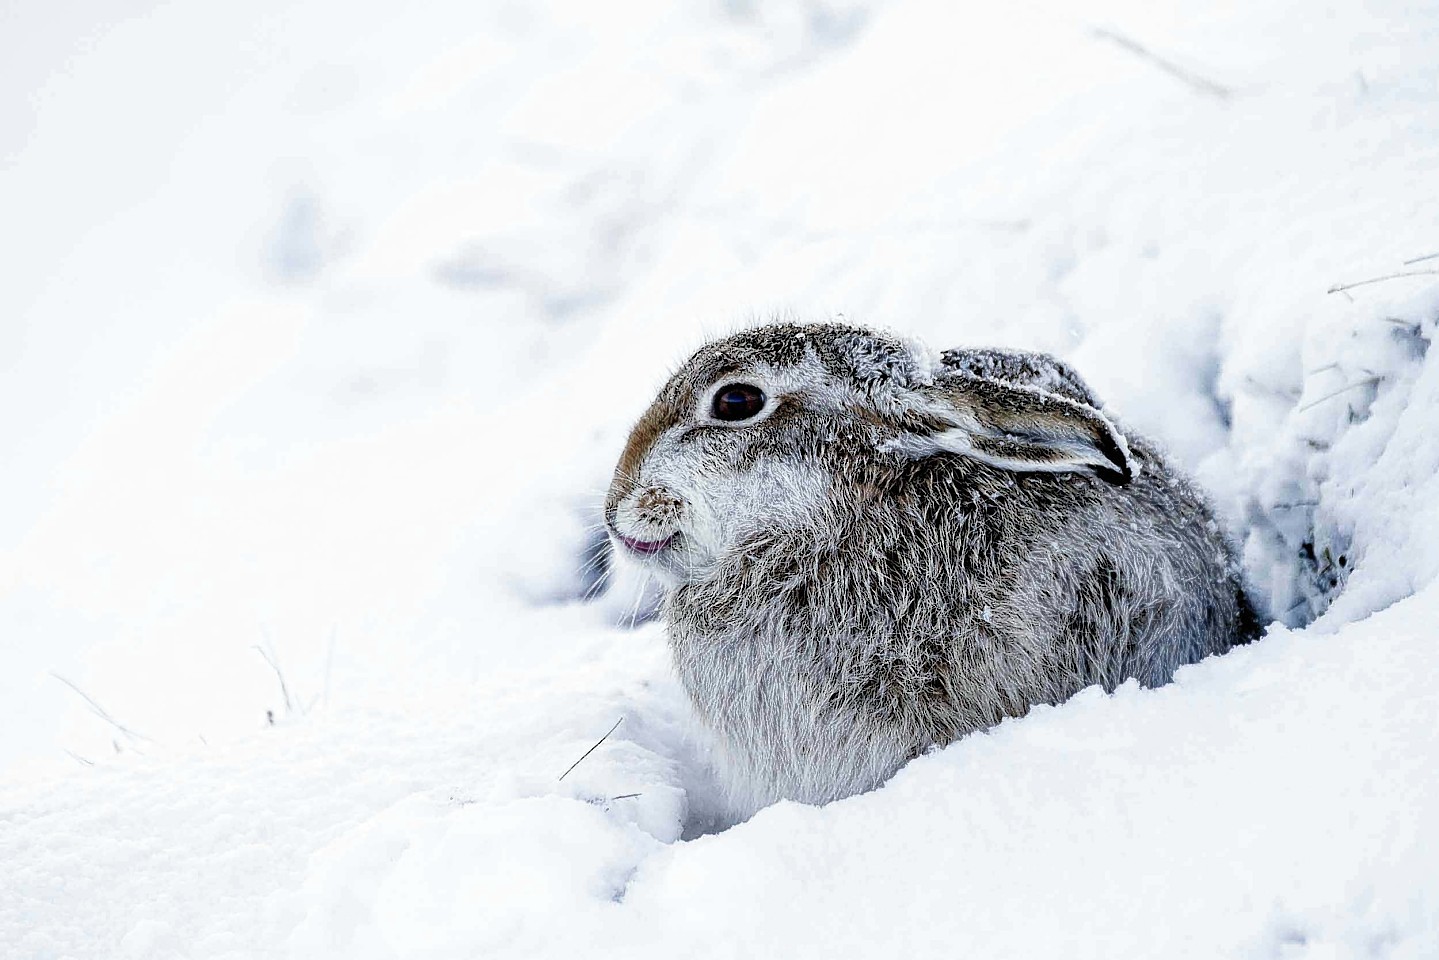 The mountain hare braves the chill